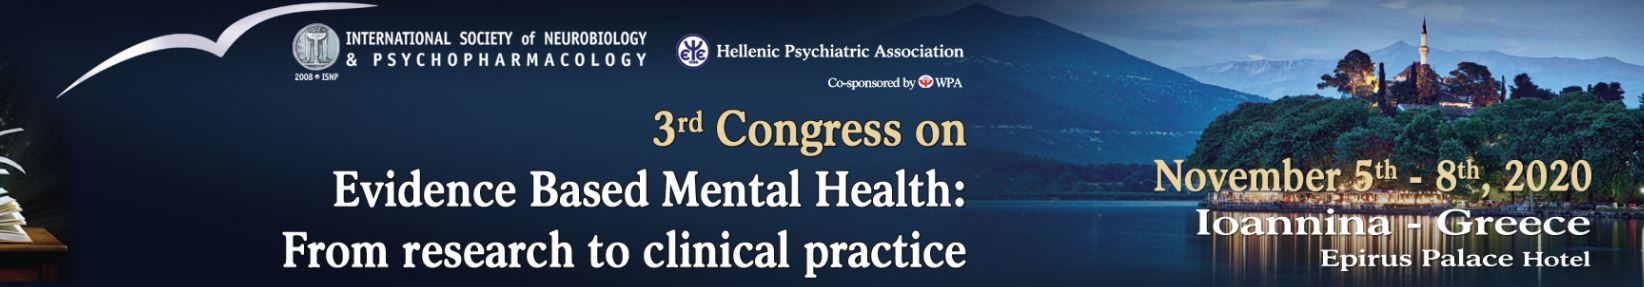 3rd Congress on Evidence Based Mental Health: from research to clinical practice 2020